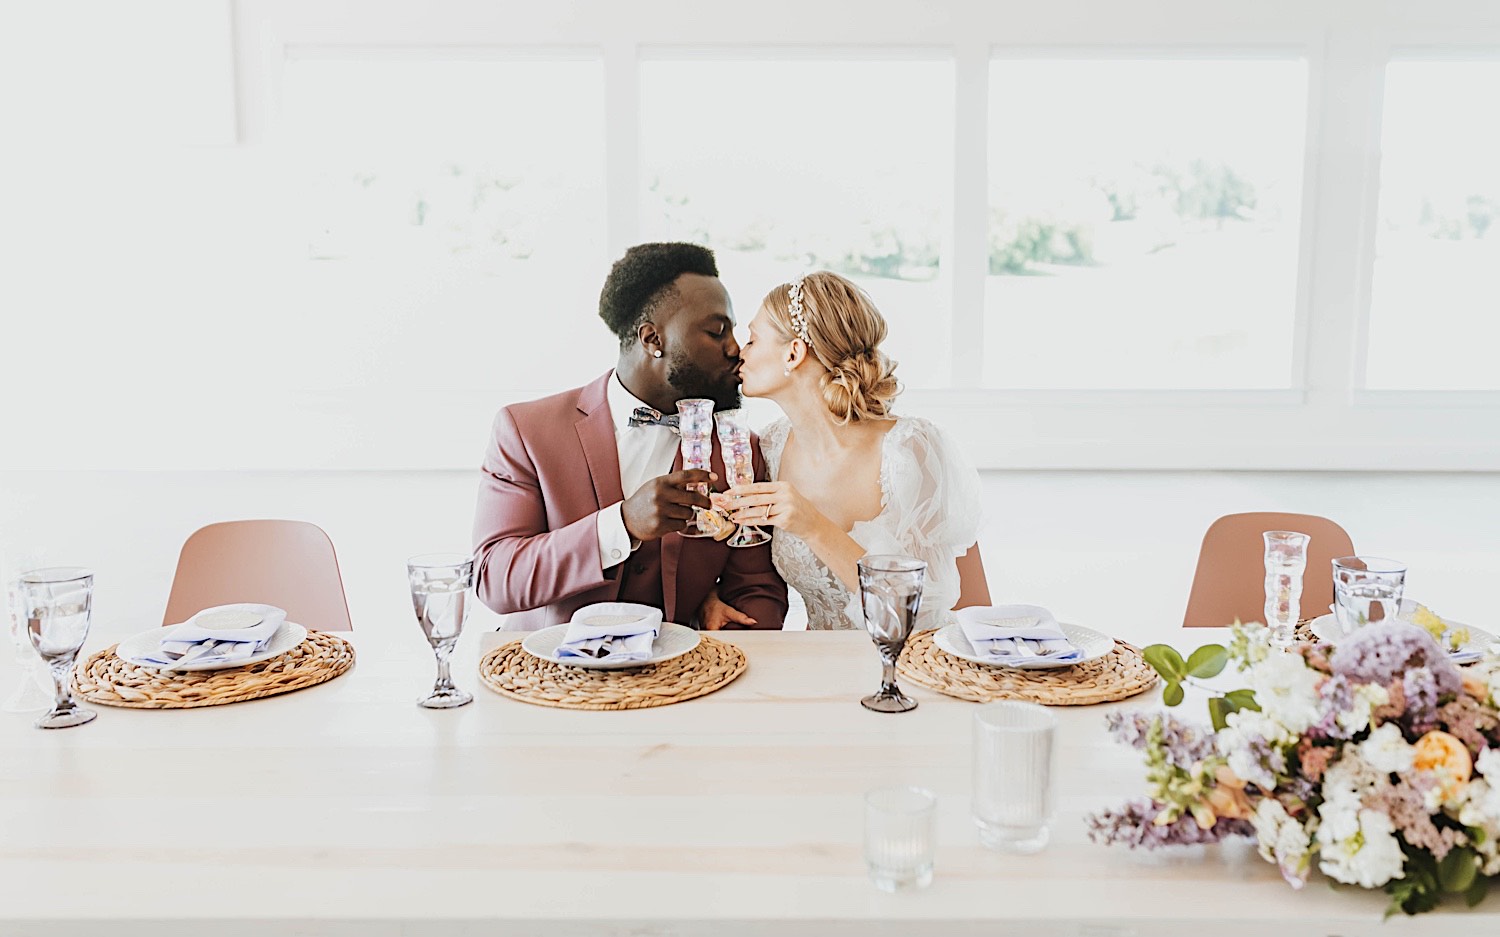 A bride and groom seated at their table kiss one another and clink their glasses together during their wedding reception at The Aisling